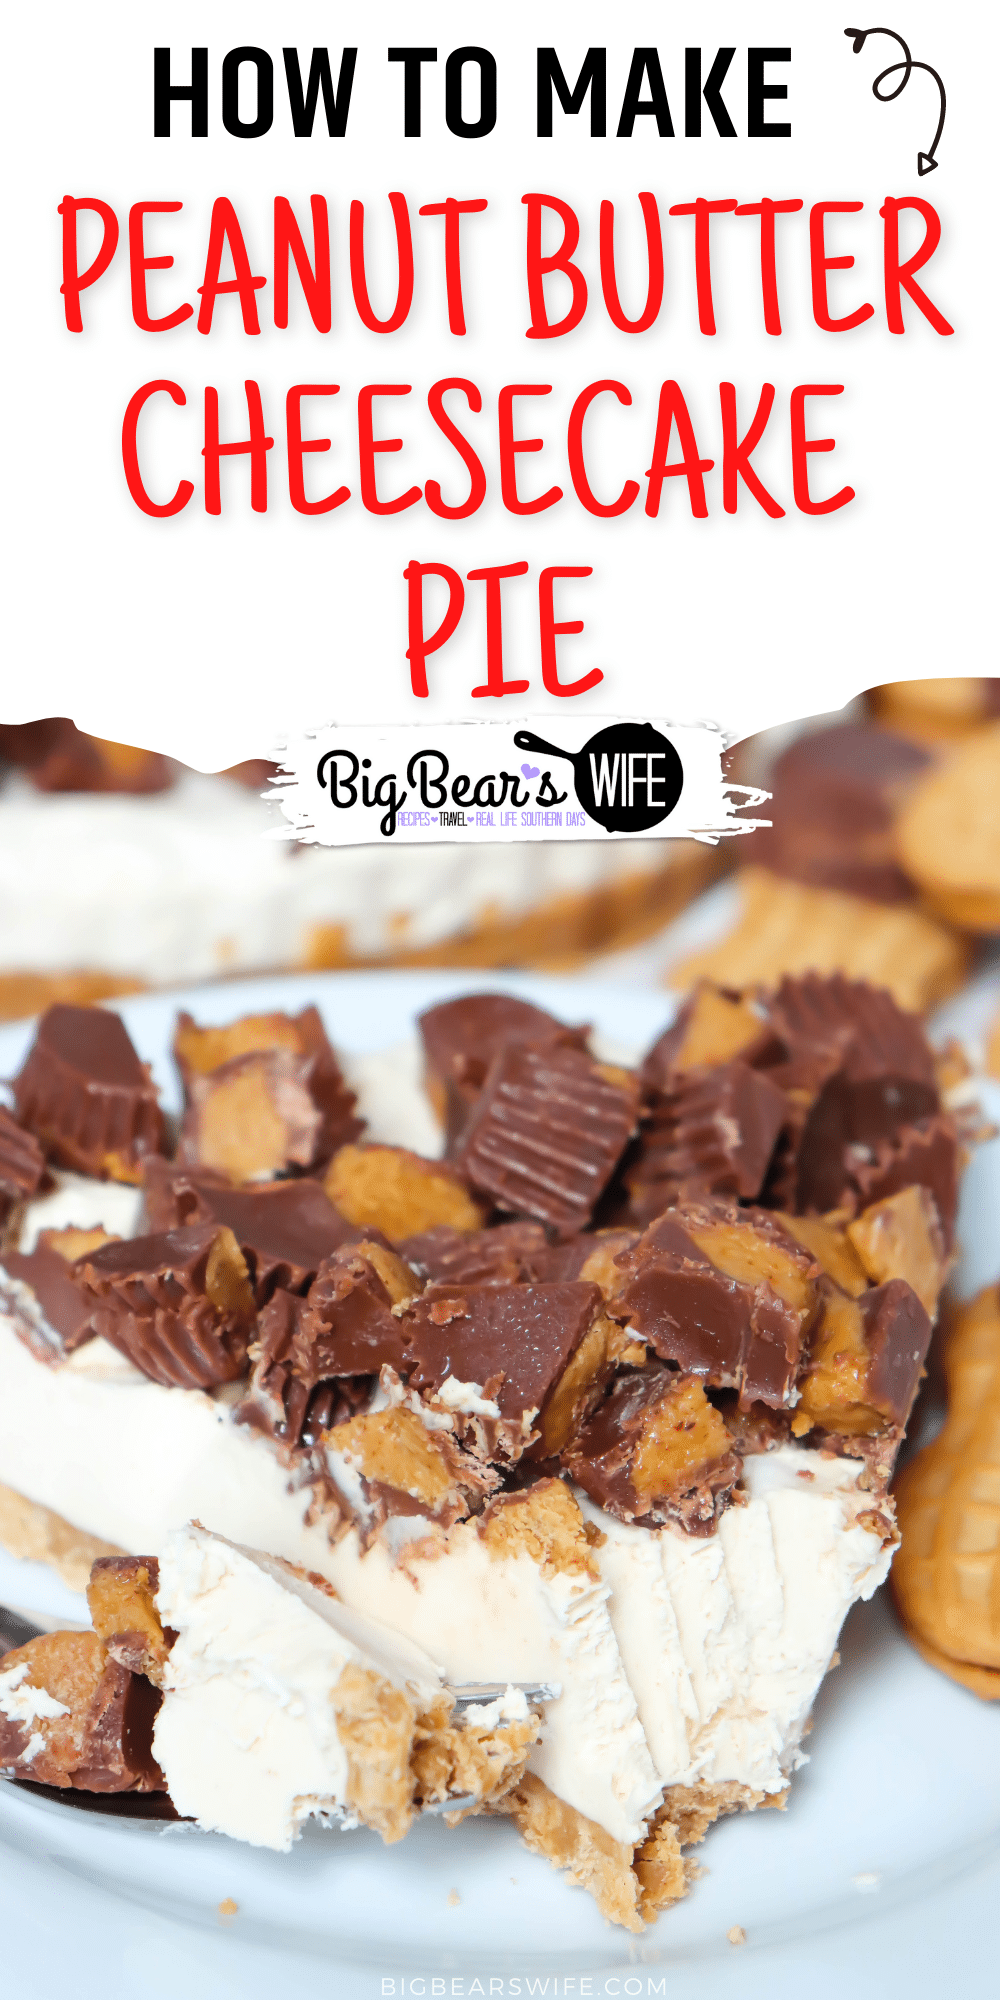 This Frozen Peanut Butter Cheesecake is the perfect chilly dessert to enjoy after your meal or for a special occasion! It has peanut butter cookie crust, homemade peanut butter cheesecake filling and it is topped with chopped peanut butter cups! via @bigbearswife